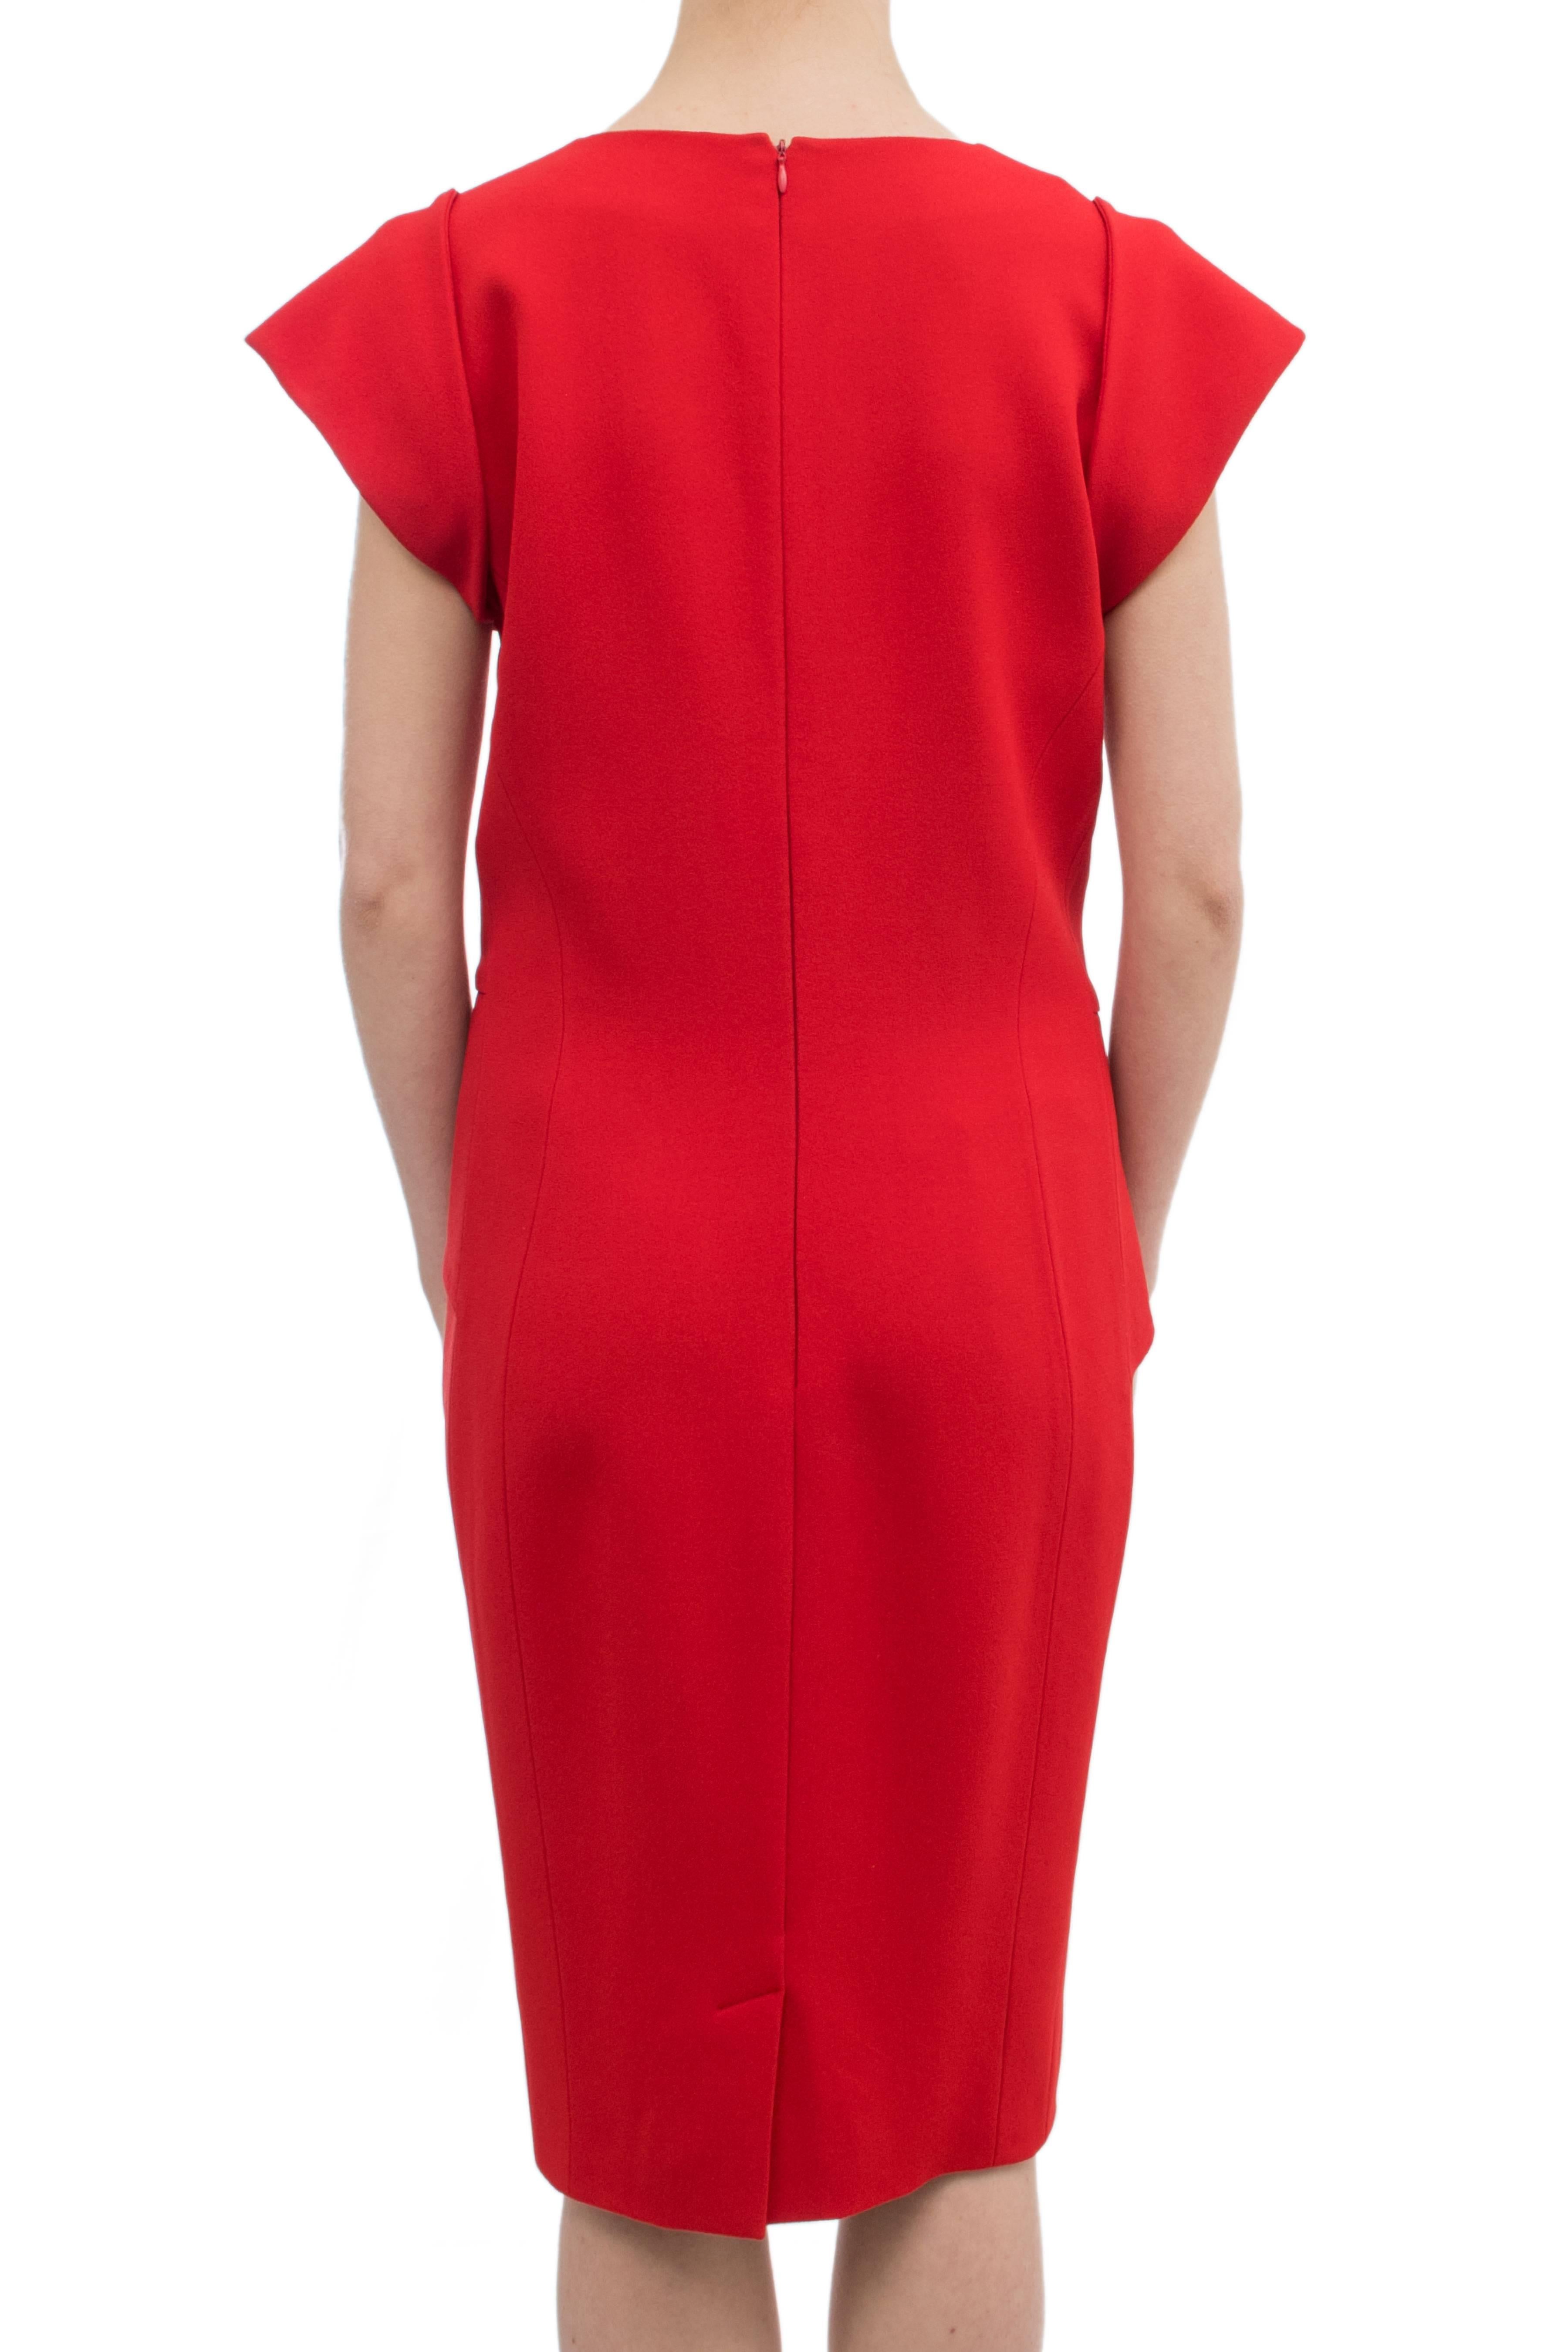 Elie Saab Red Cocktail Dress with Gathered Waist 2